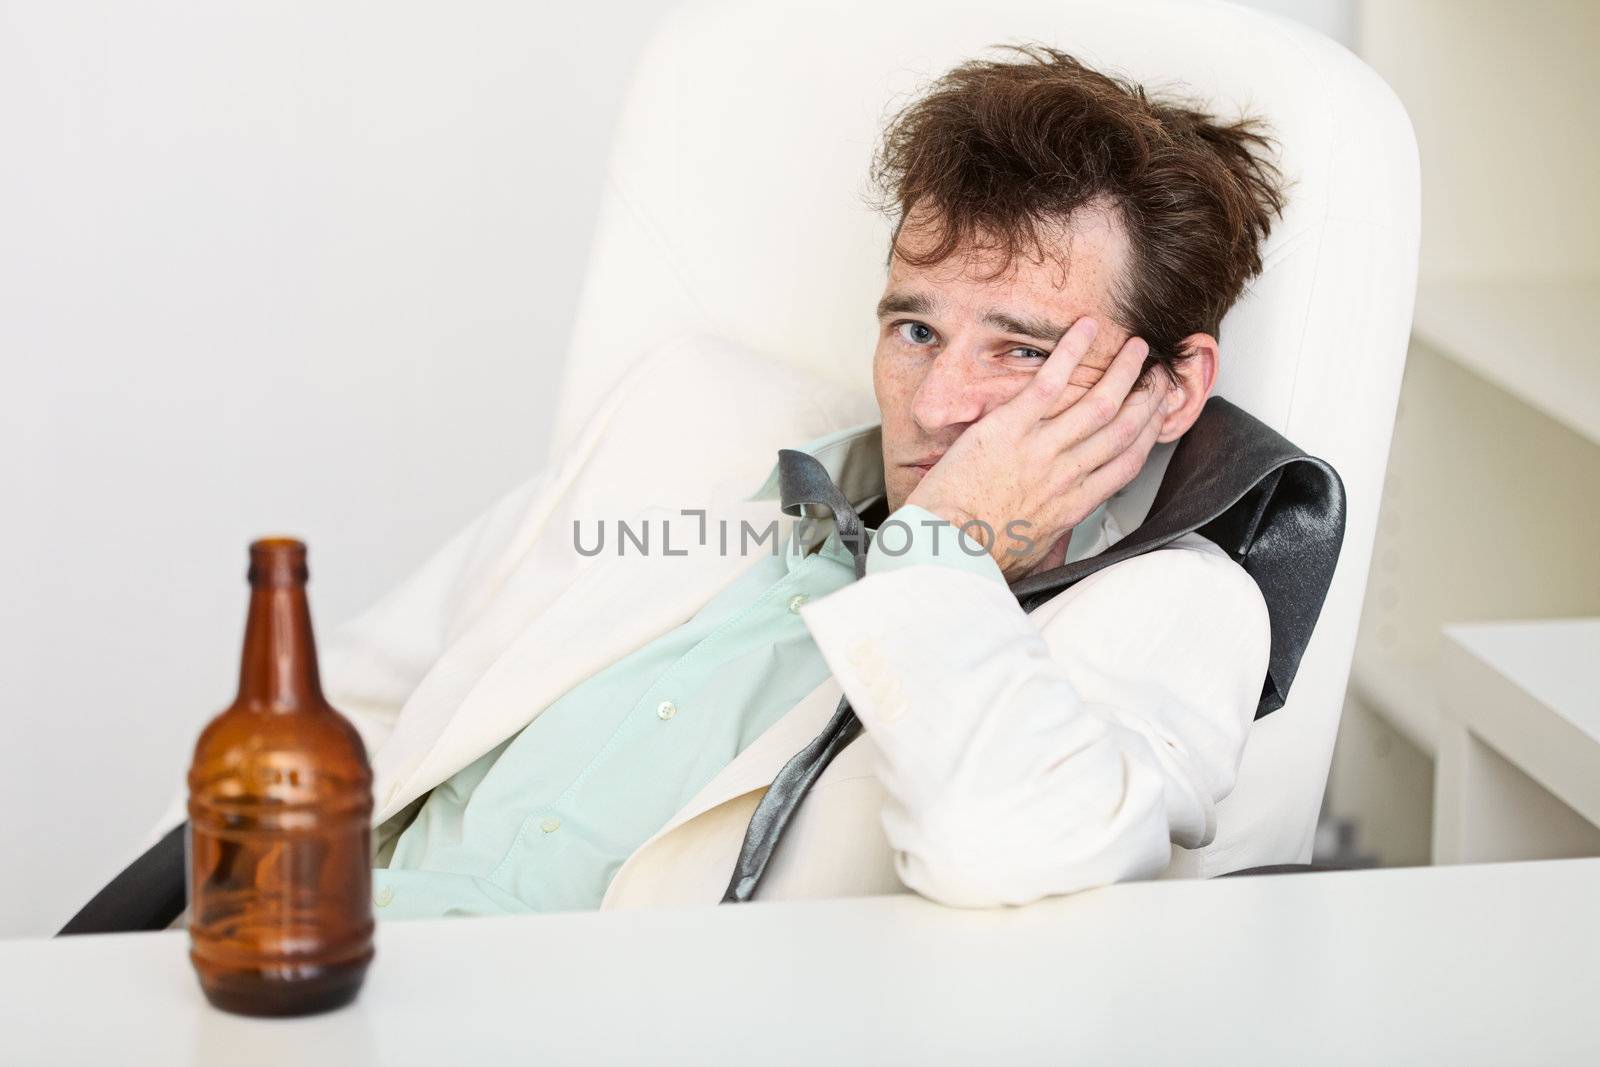 The guy is suffering from a hangover because beer is gone